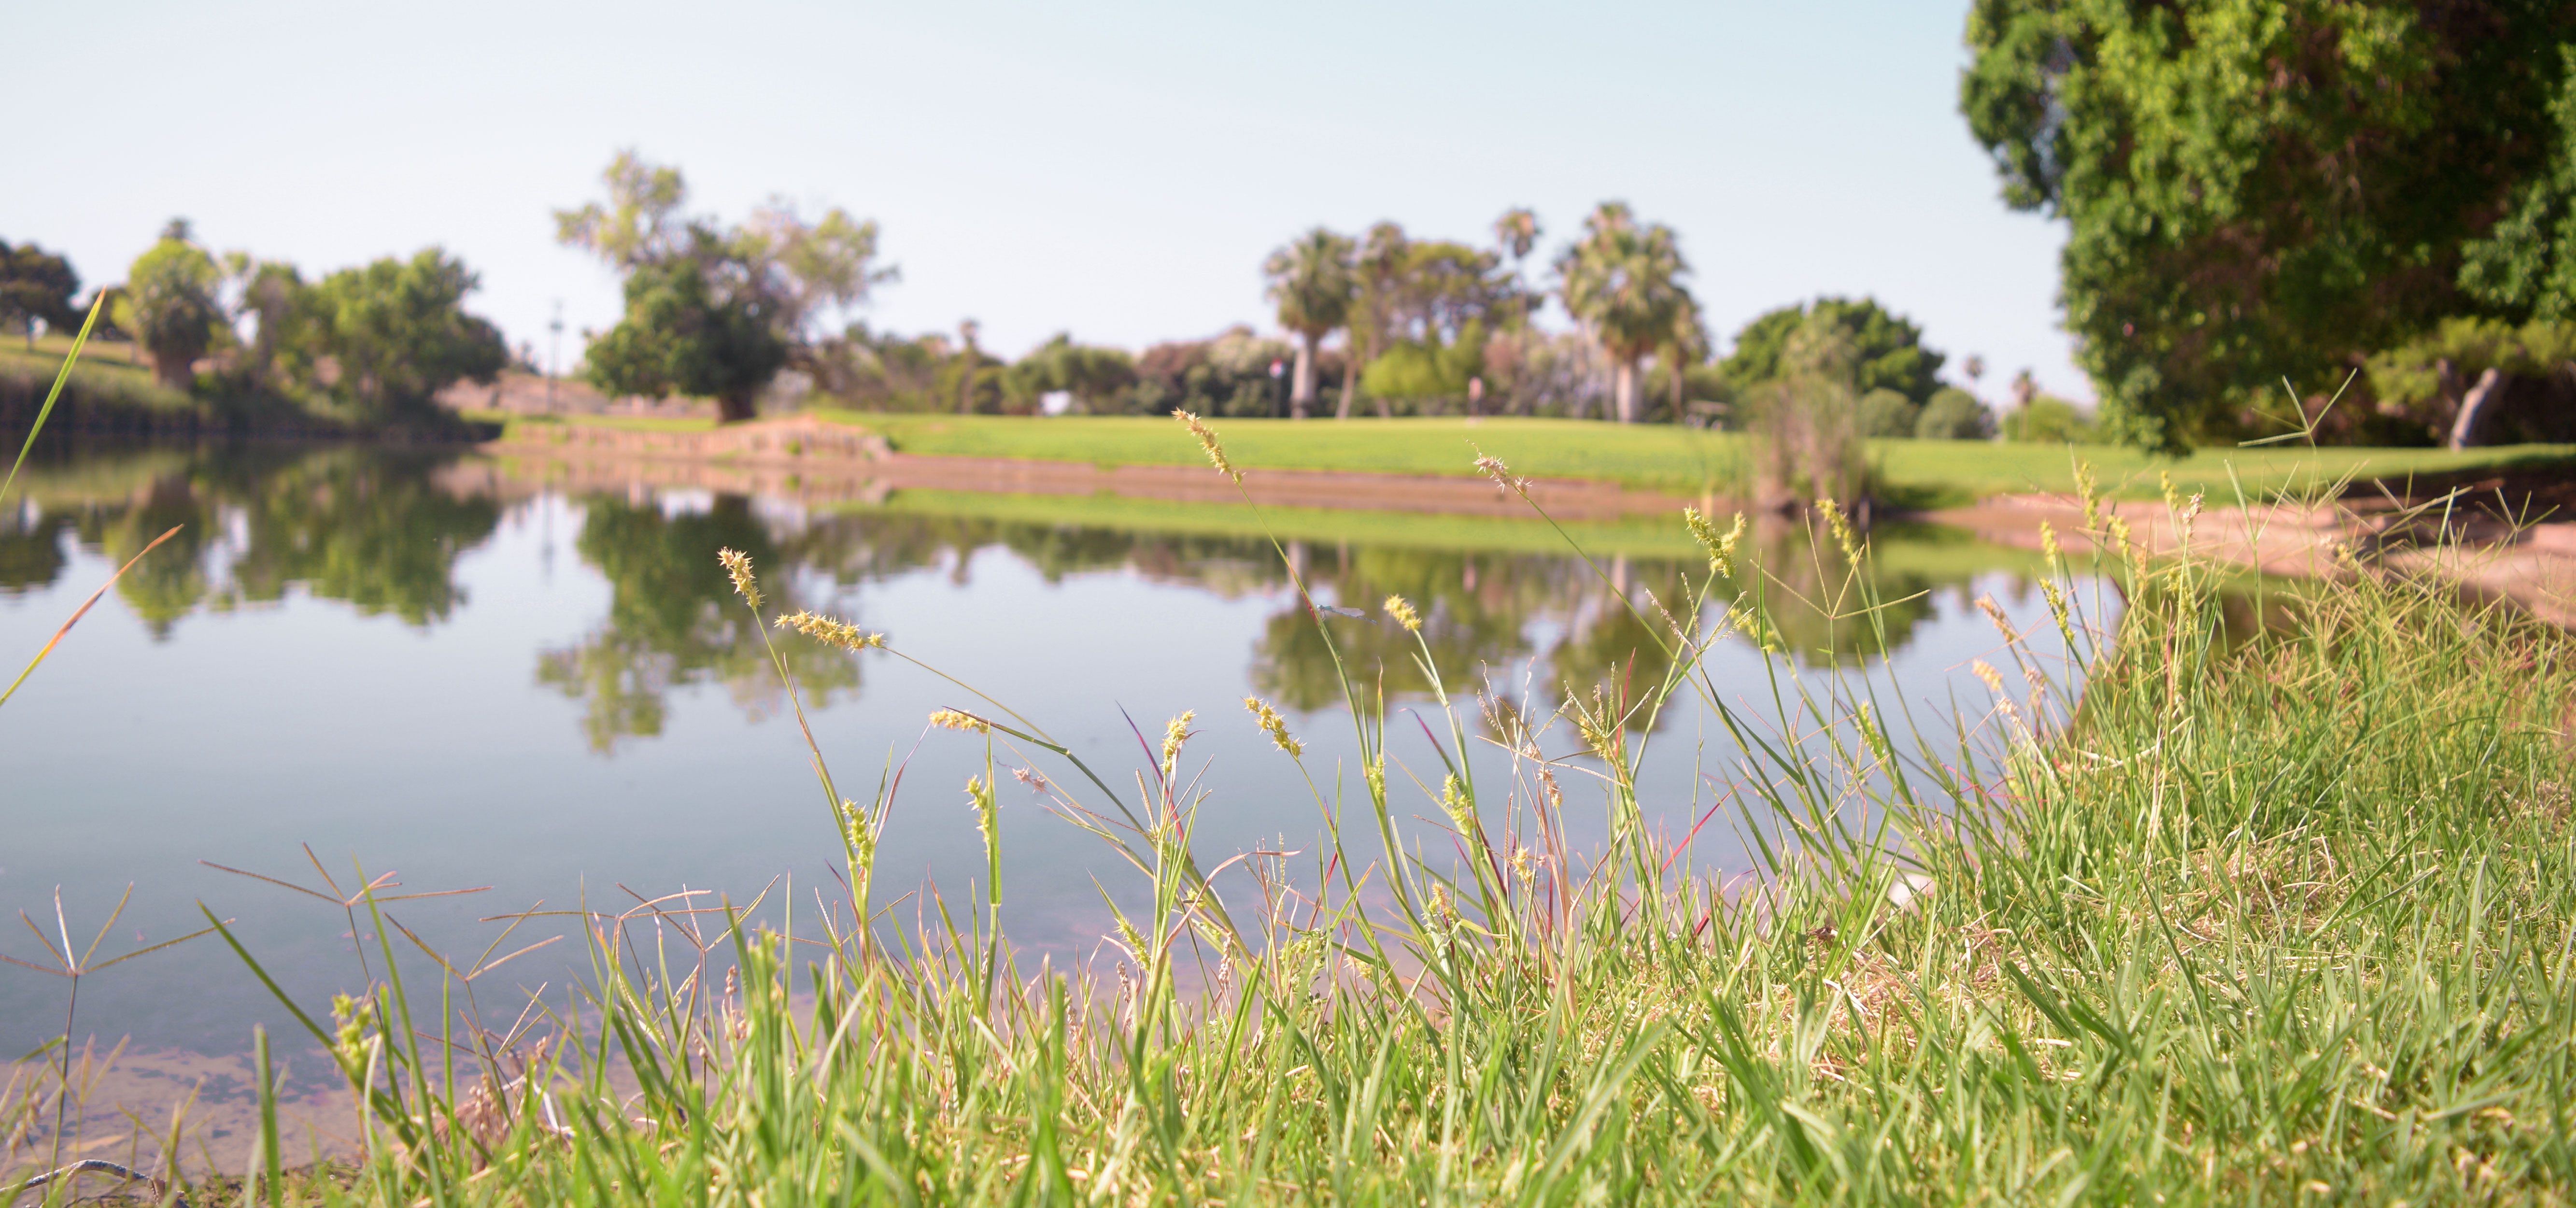 homepage image of golf course with water